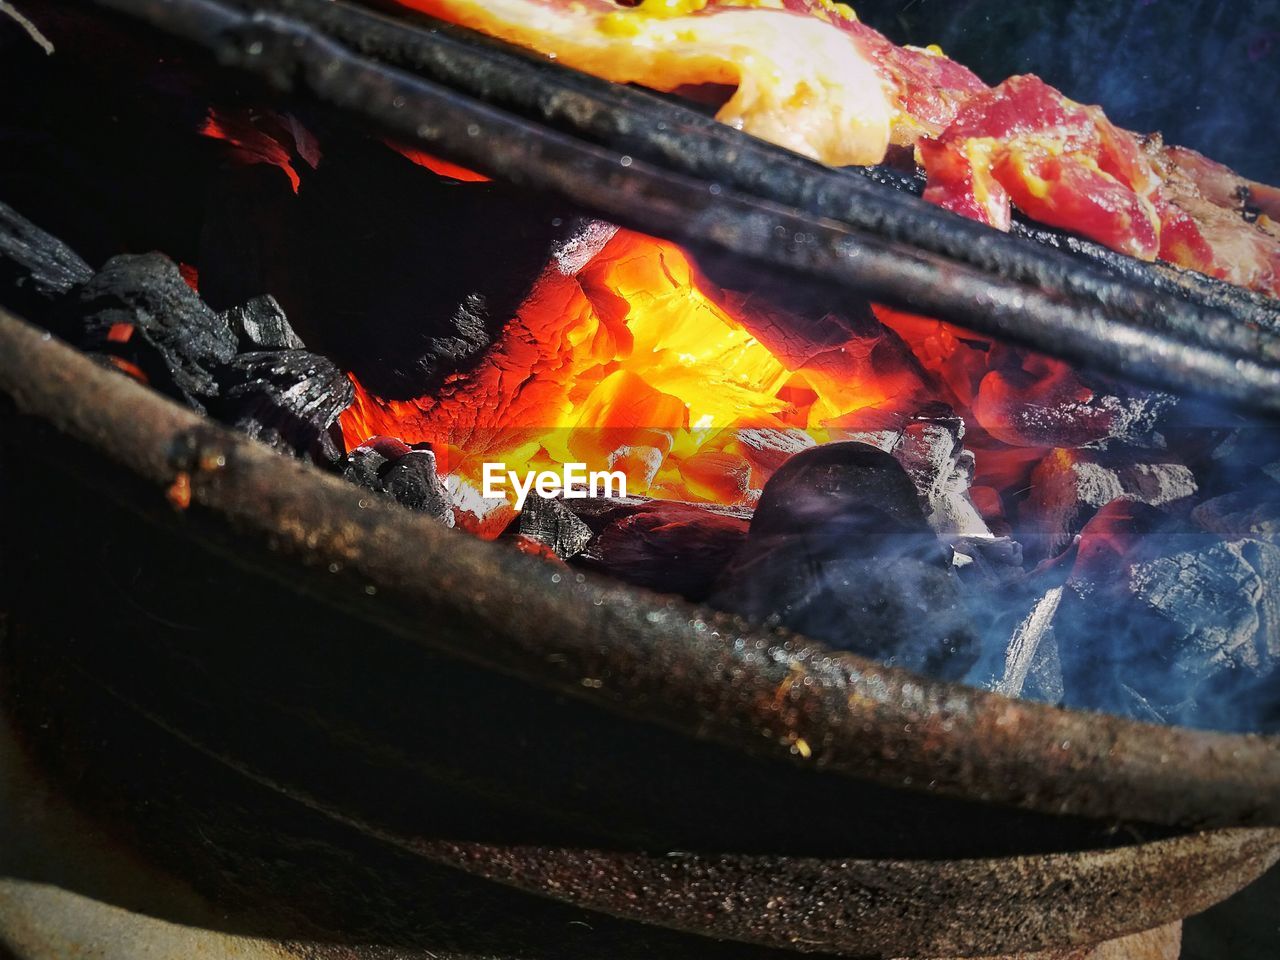 CLOSE-UP OF WORKING ON BARBECUE